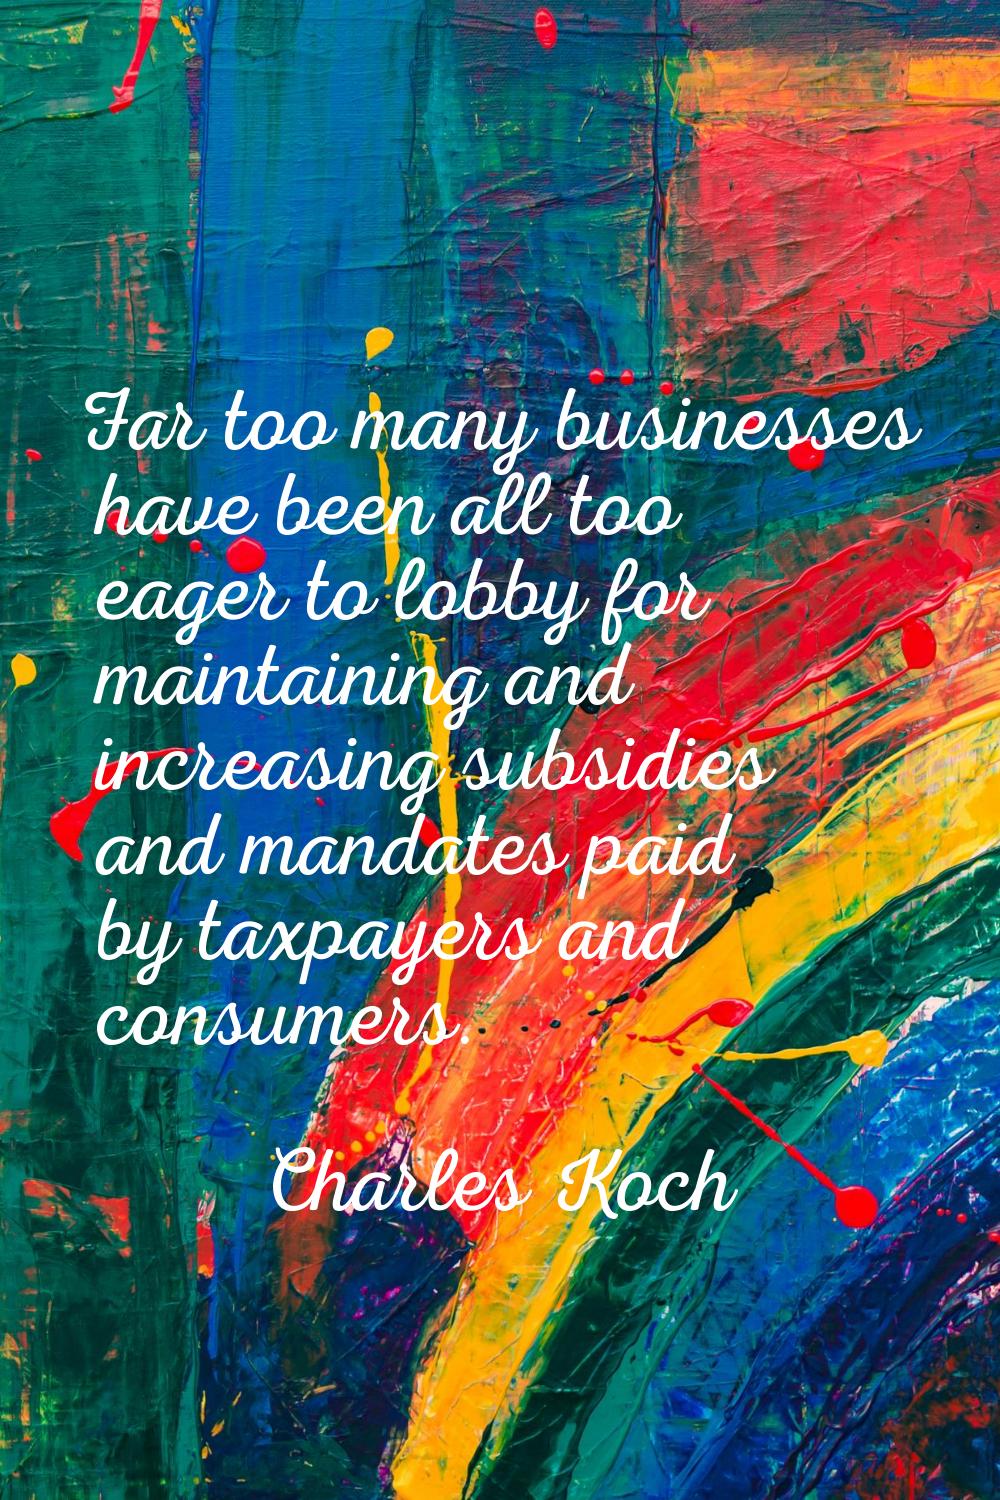 Far too many businesses have been all too eager to lobby for maintaining and increasing subsidies a